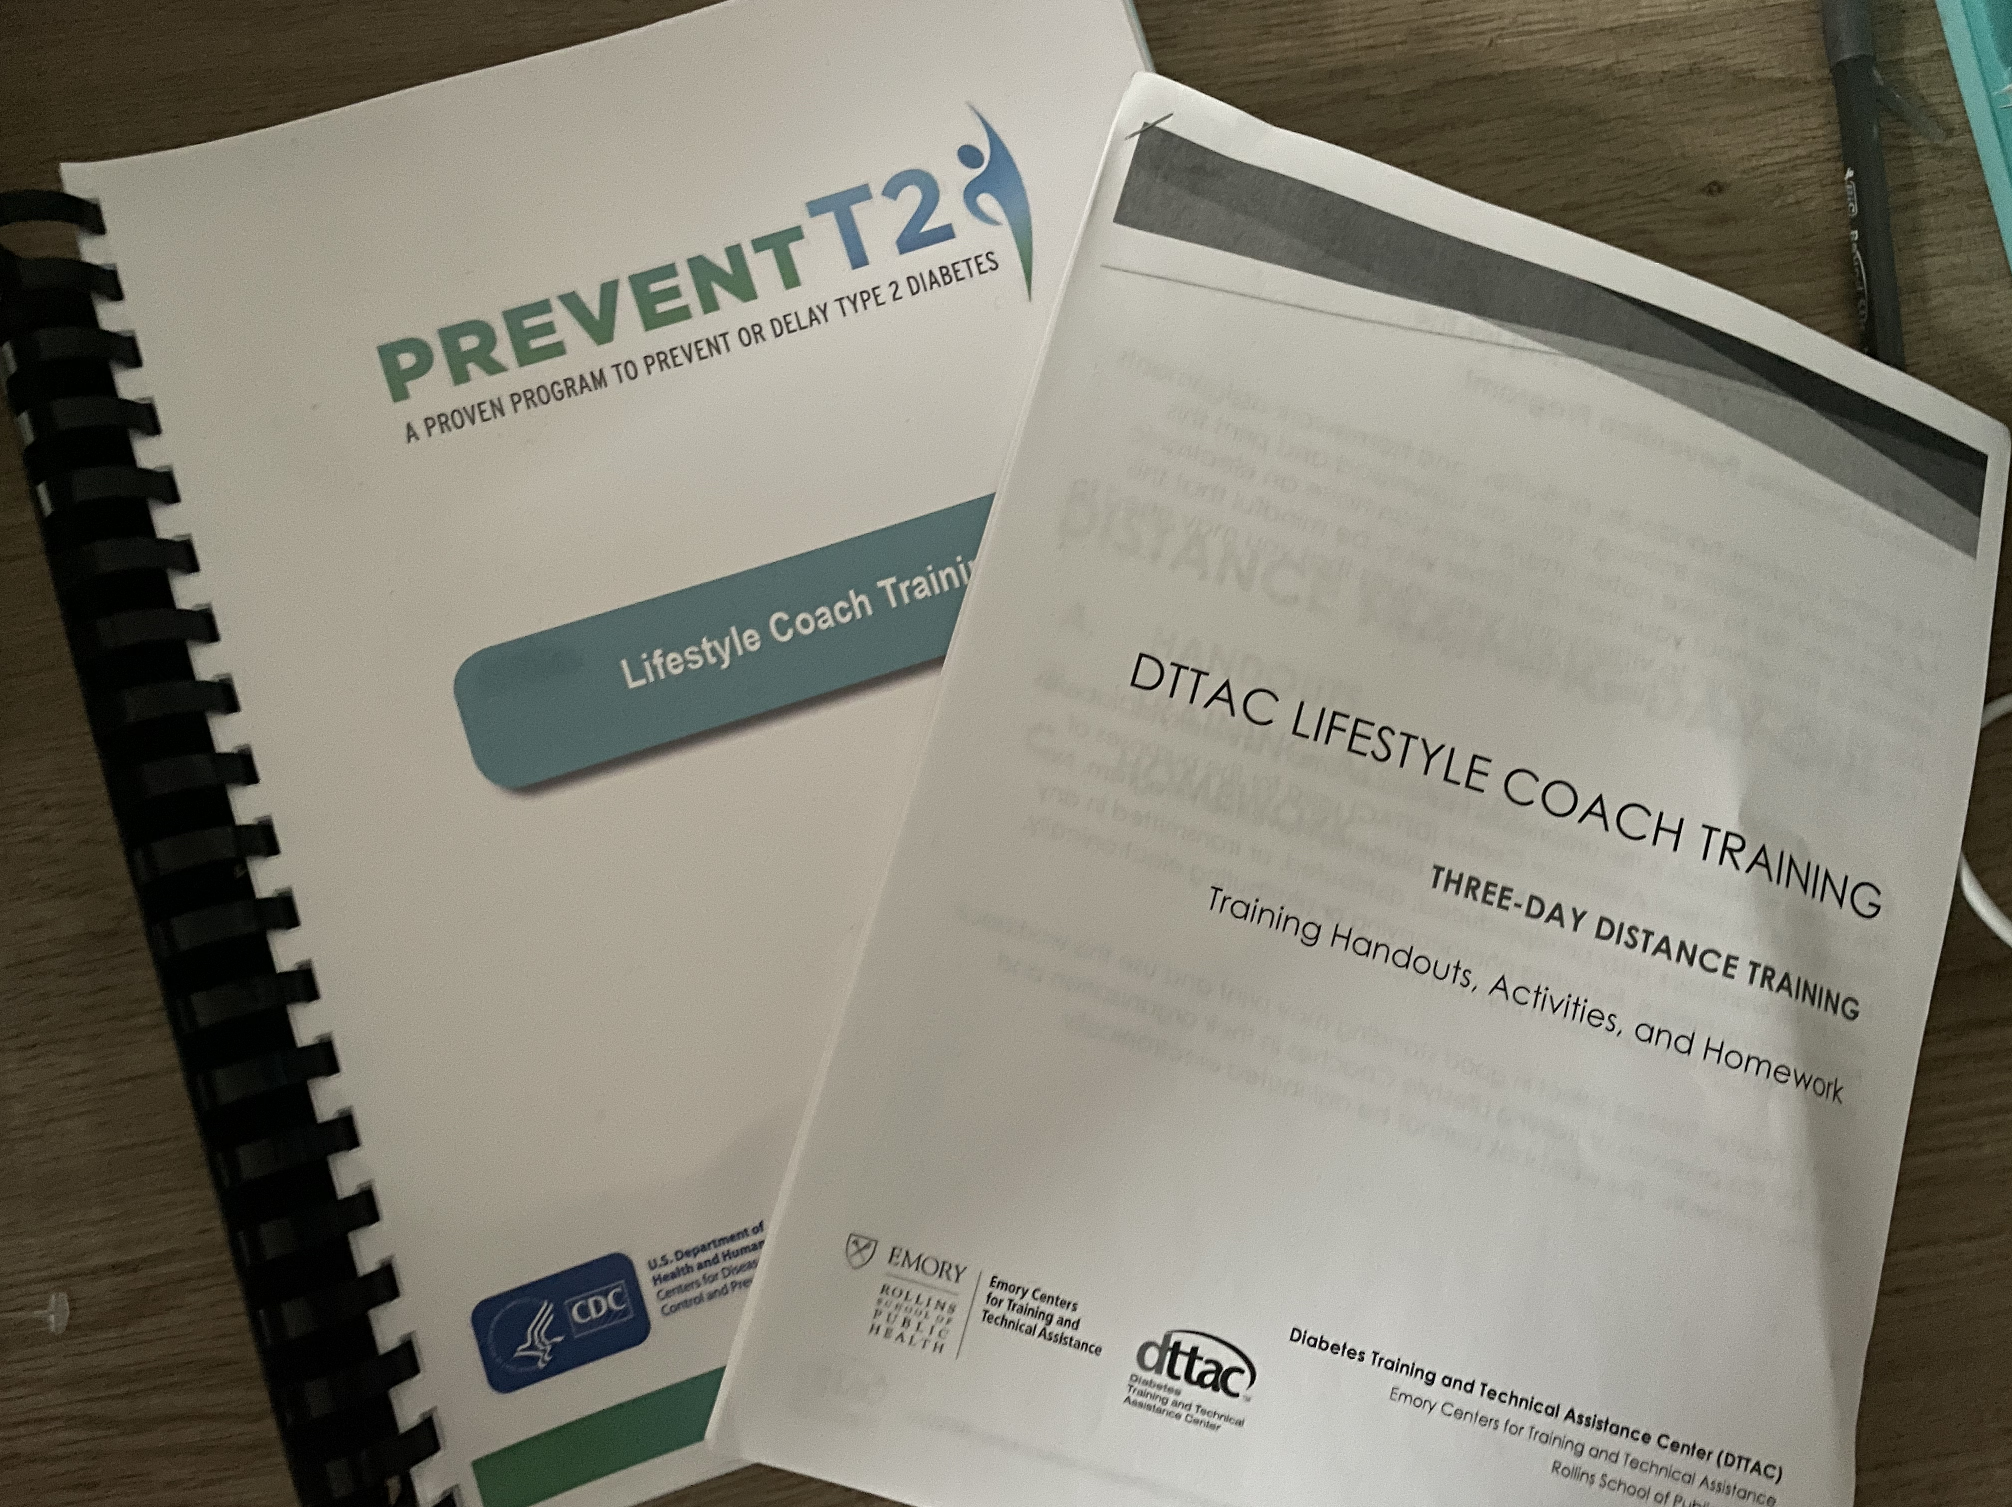 Two pamphlets sitting on a desk. The top one is called DTTAC Lifestyle coach training. The one under that is called Prevent T2: A proven program to prevent or delay type 2 diabetes